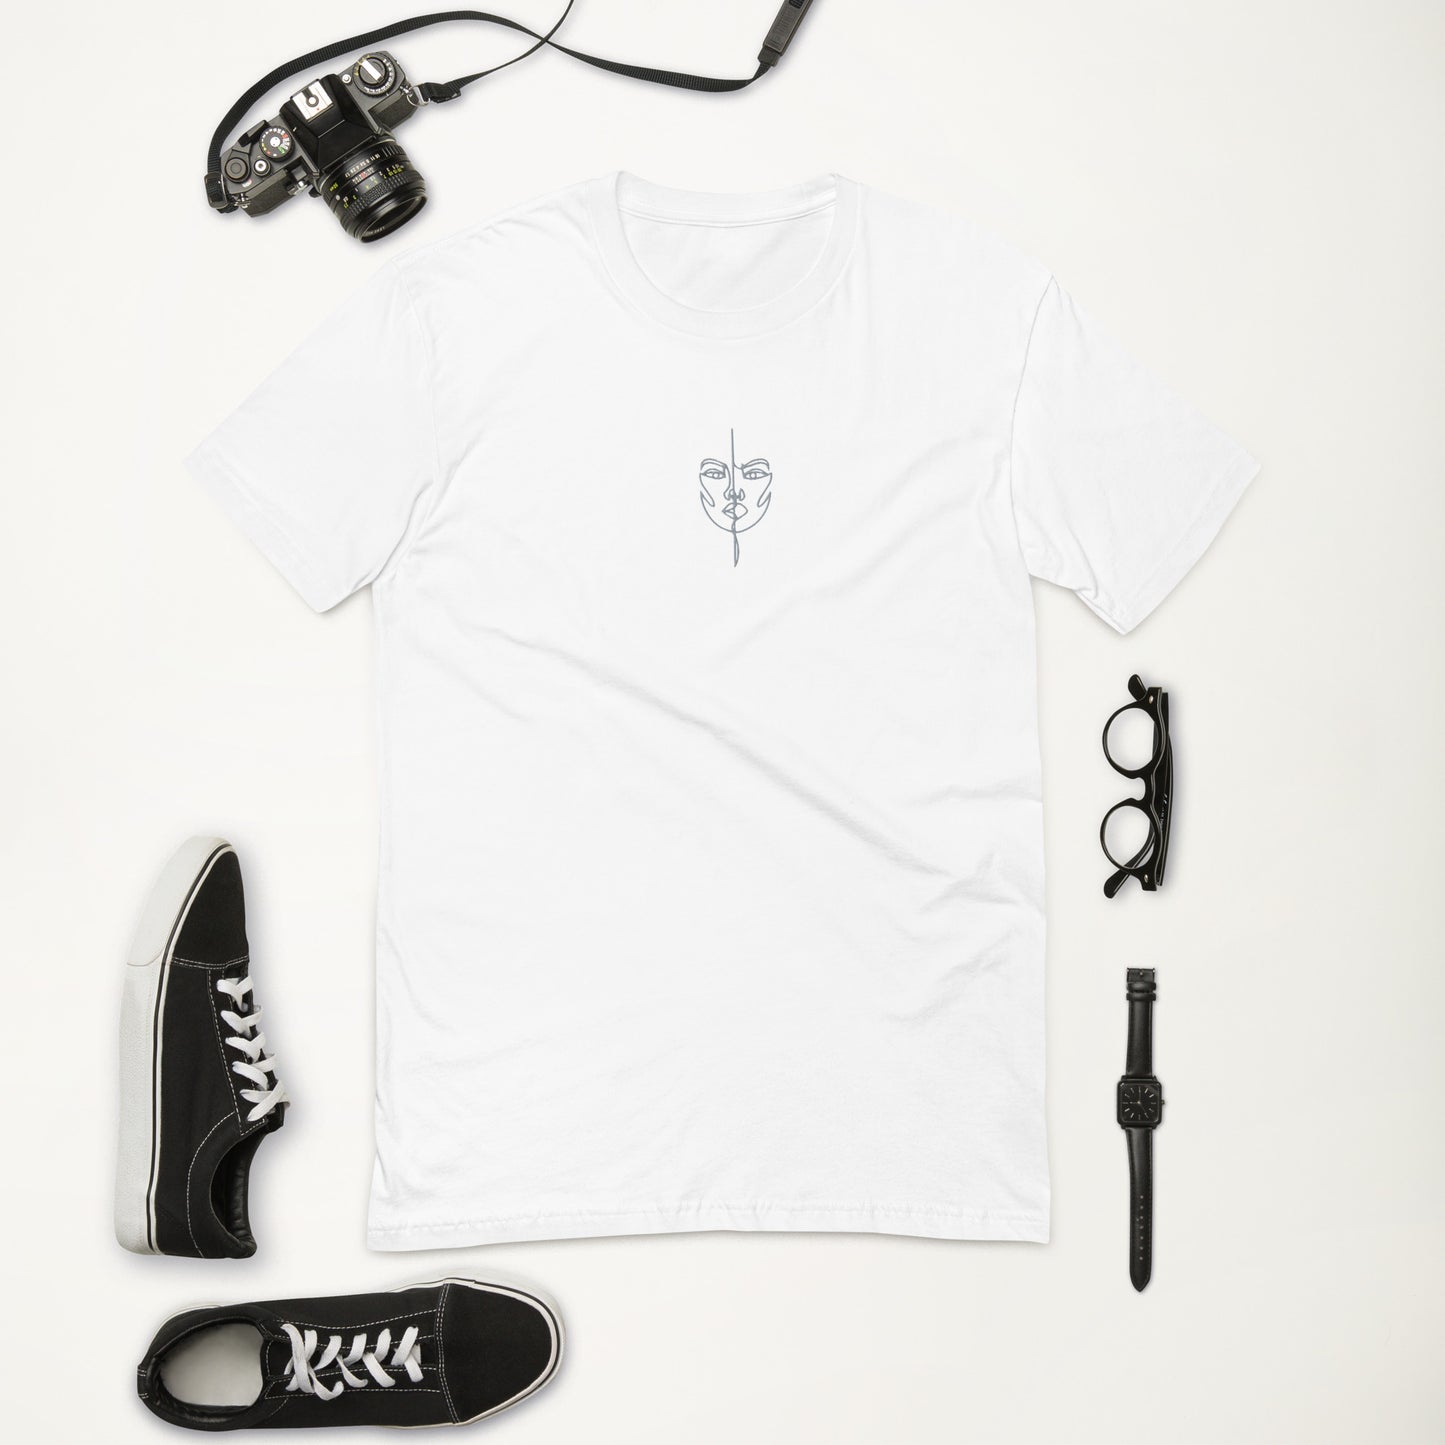 Classik Men's Fitted T